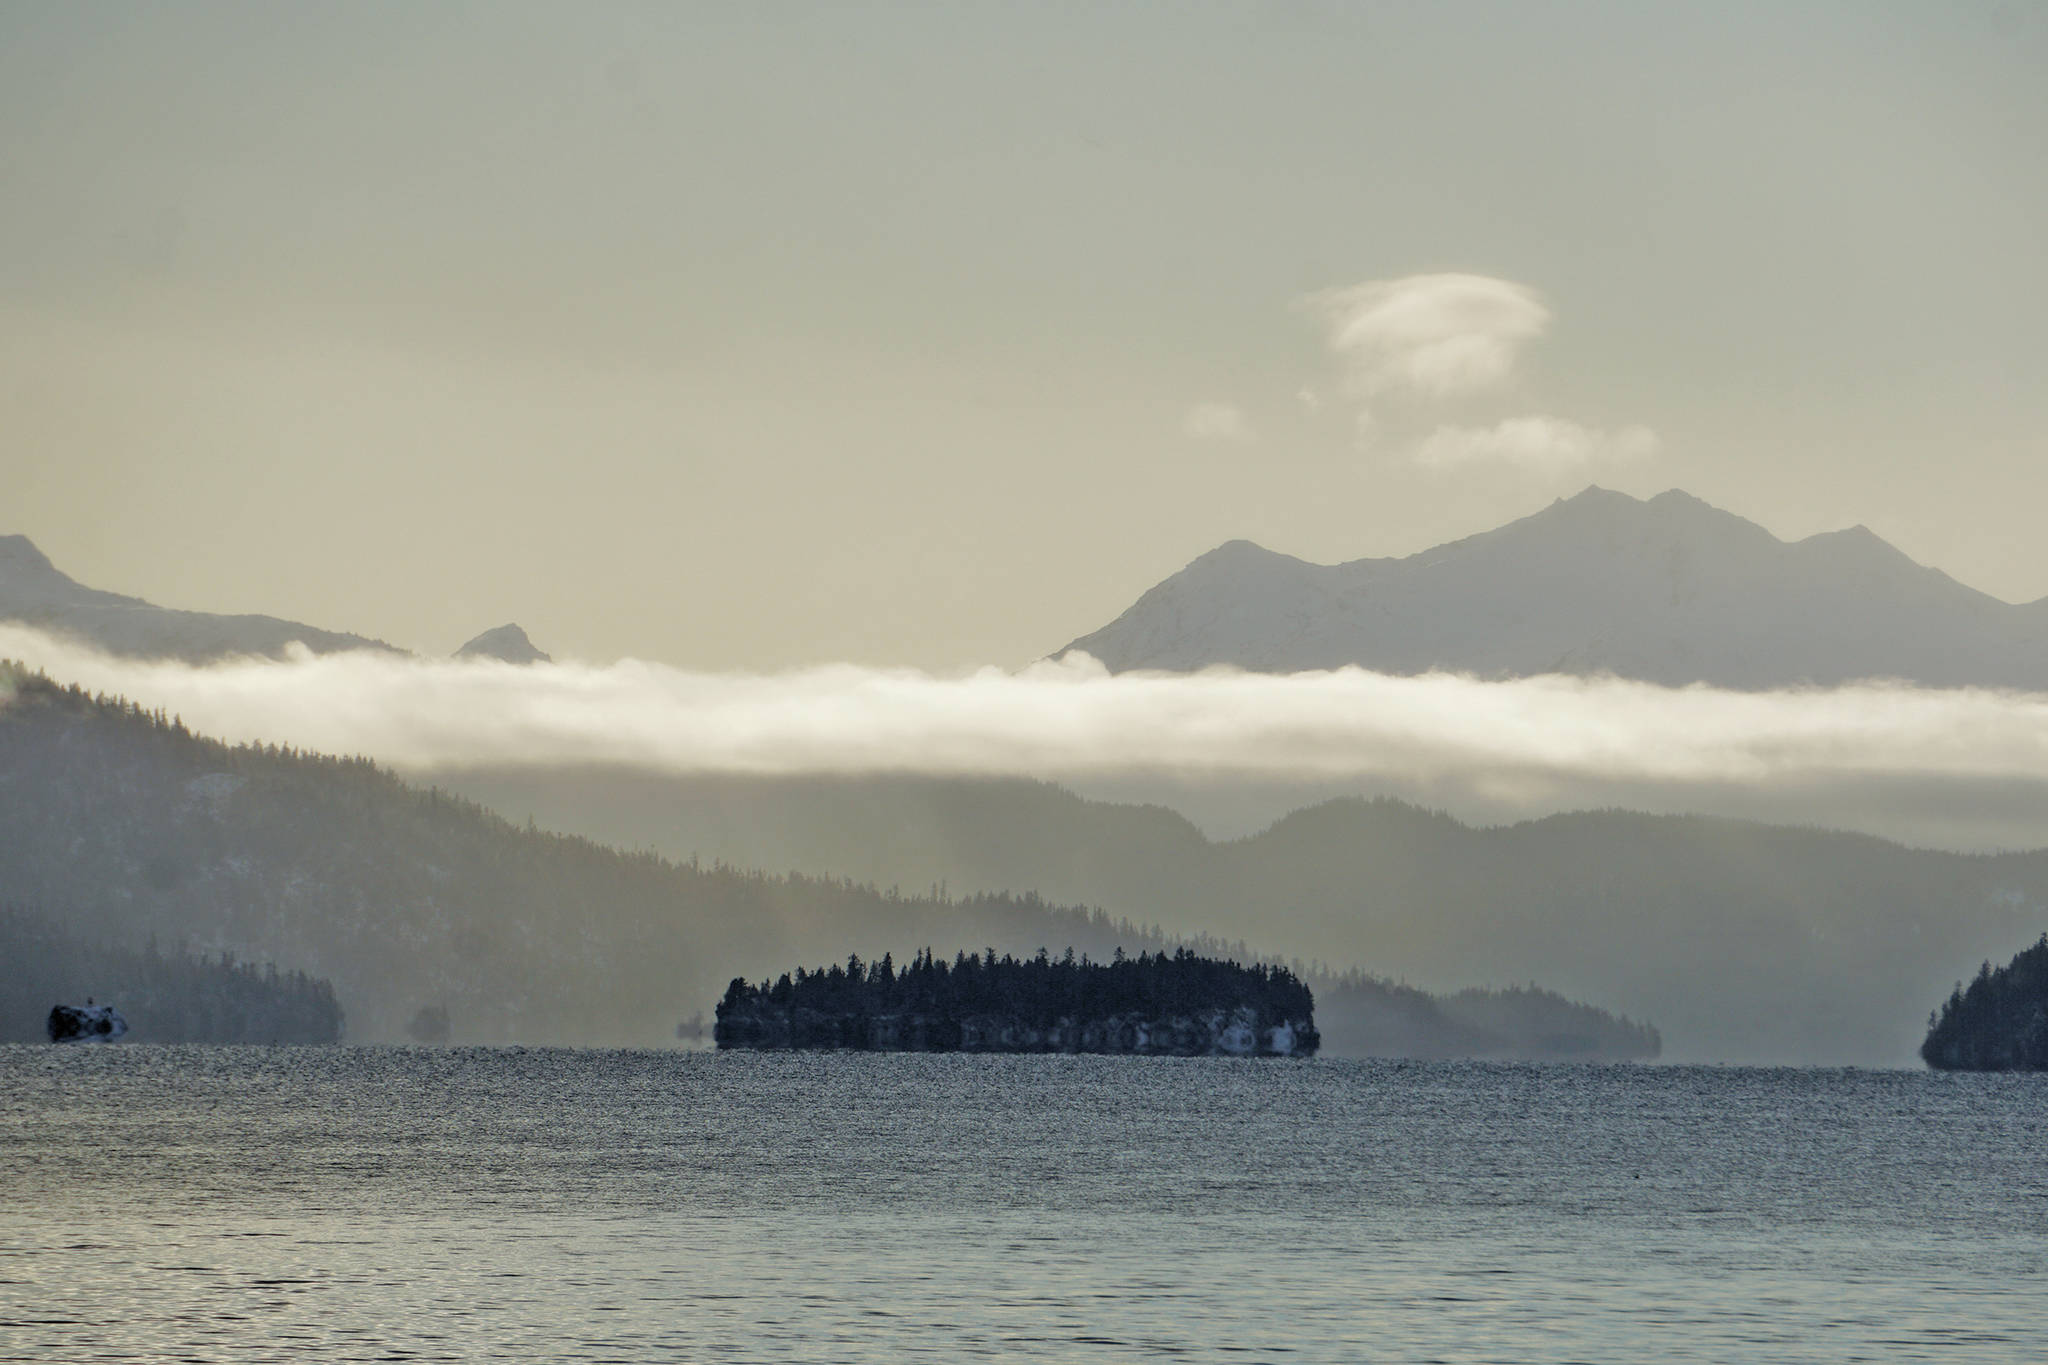 Light snow falls over Eldred Passage on the south side of Kachemak Bay on Monday afternoon, Jan. 20, 2020, near Homer, Alaska. (Photo by Michael Armtrong/Homer News)